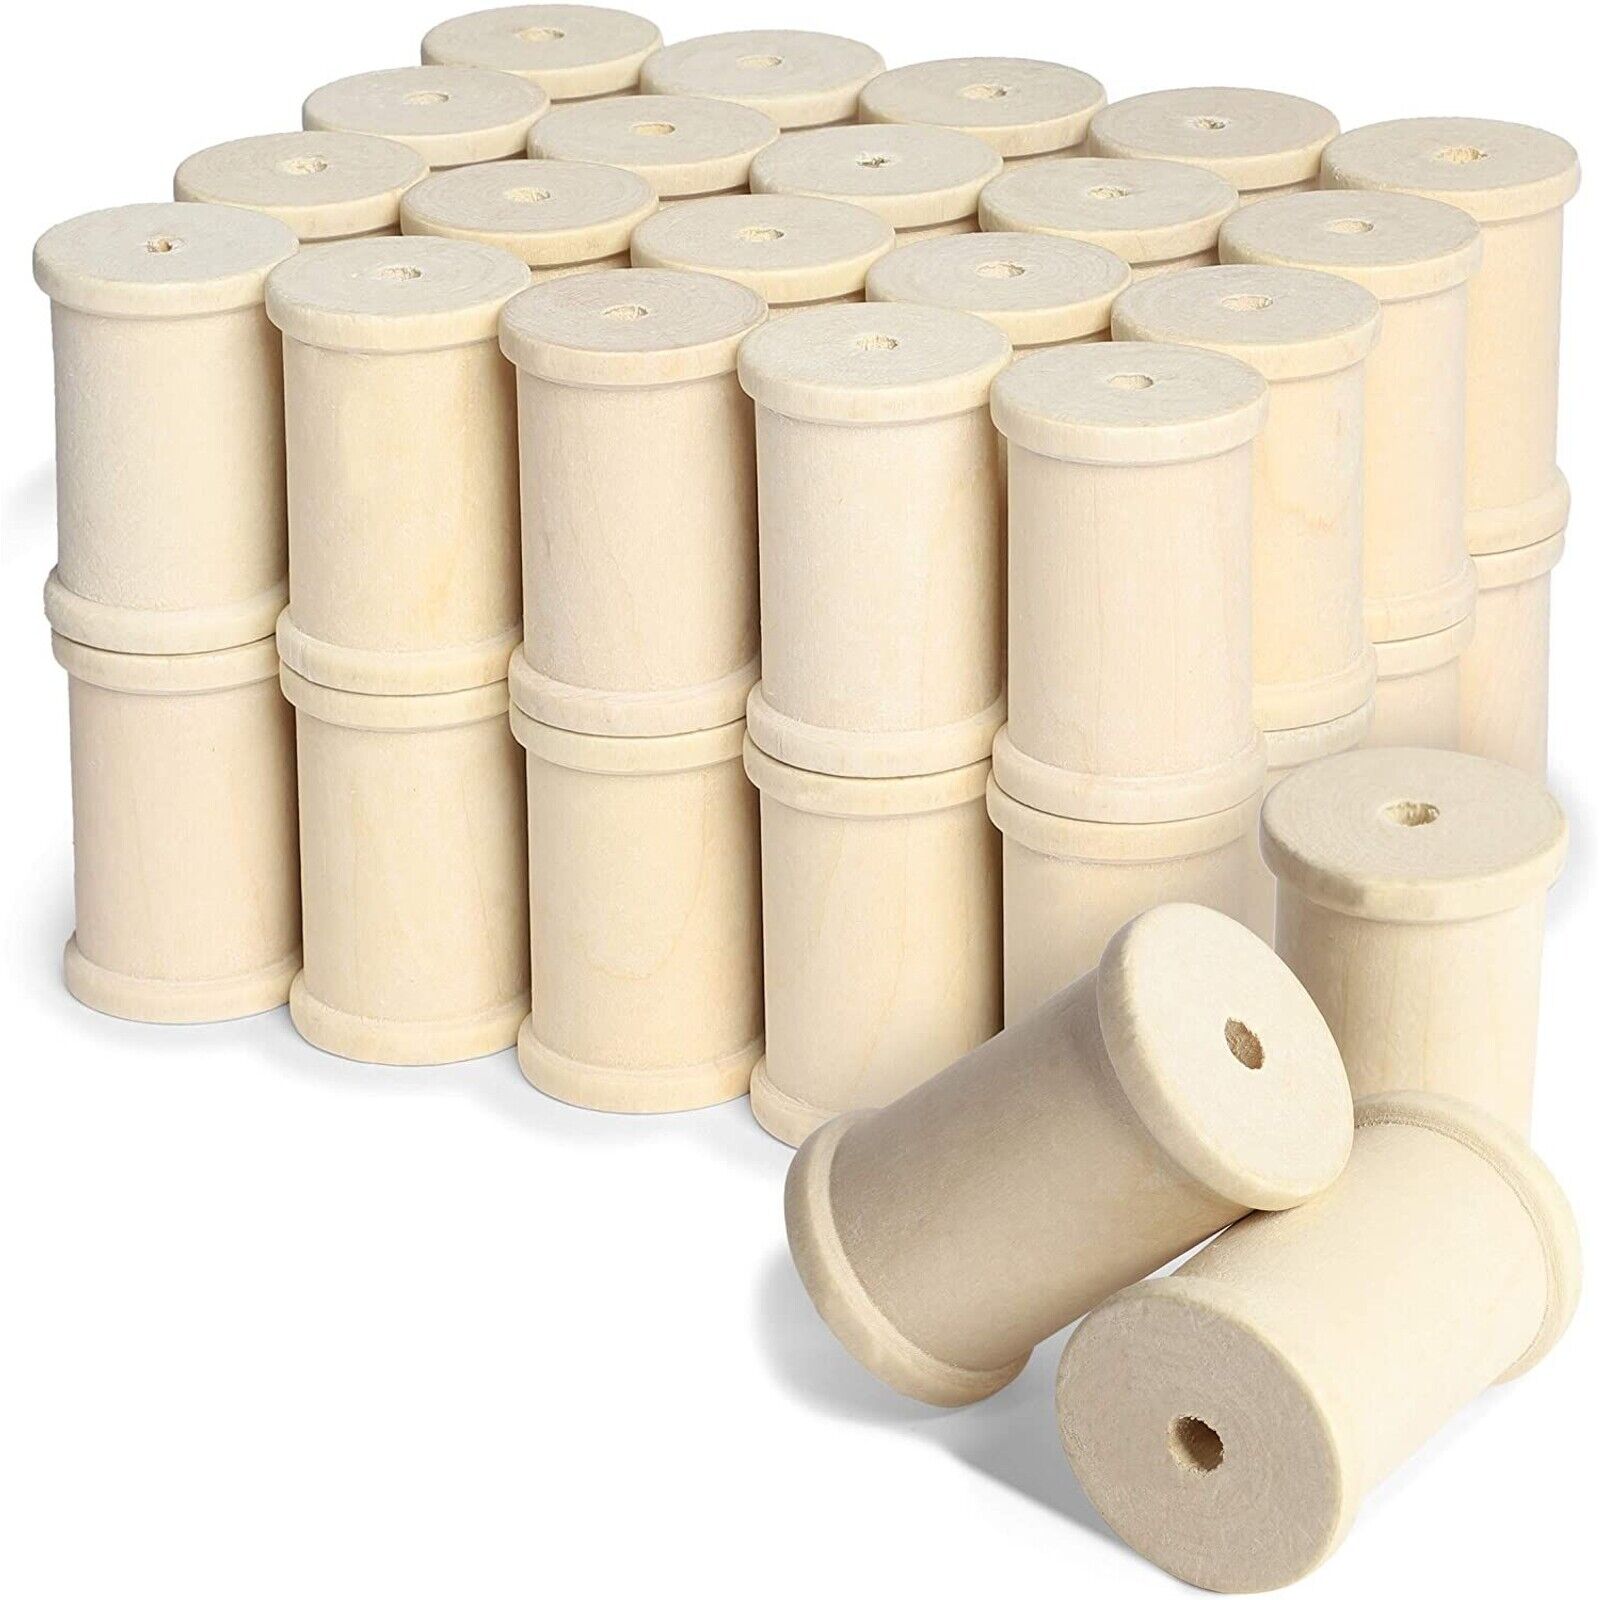 40 Pack Large Unfinished Wooden Spools for Crafts and Sewing DIY, 1-3/8 x 2 In